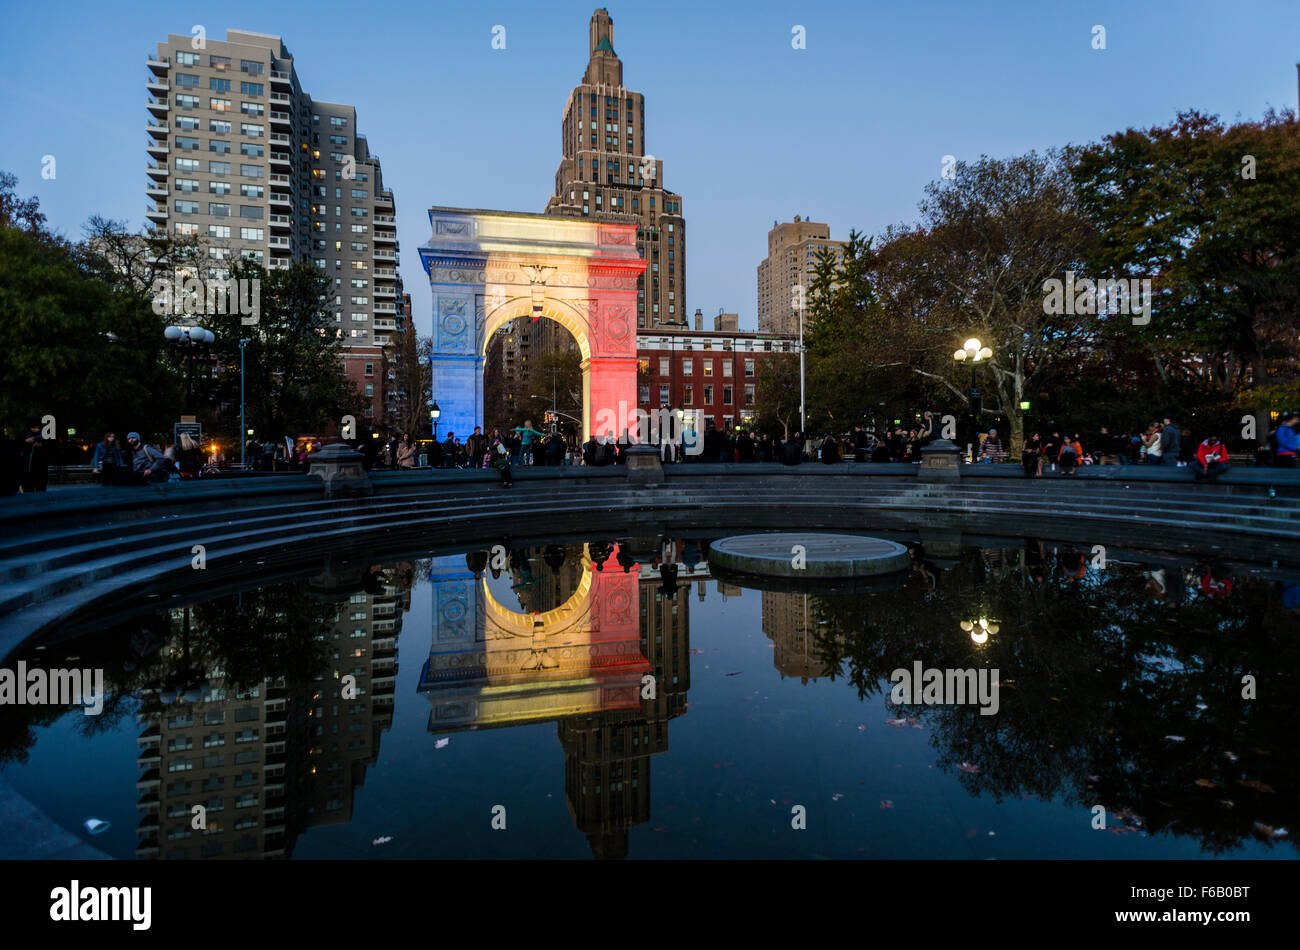 New York, NY - 15 November 2015 NYC  The arch in Washington Square Park lights up in solidarity with Paris.  Beneath the arch is a candlelight shrine to commemorate the victims of the 13 November Paris terror attacks. Credit: Stacy Walsh Rosenstock/Alamy Live News Stock Photo